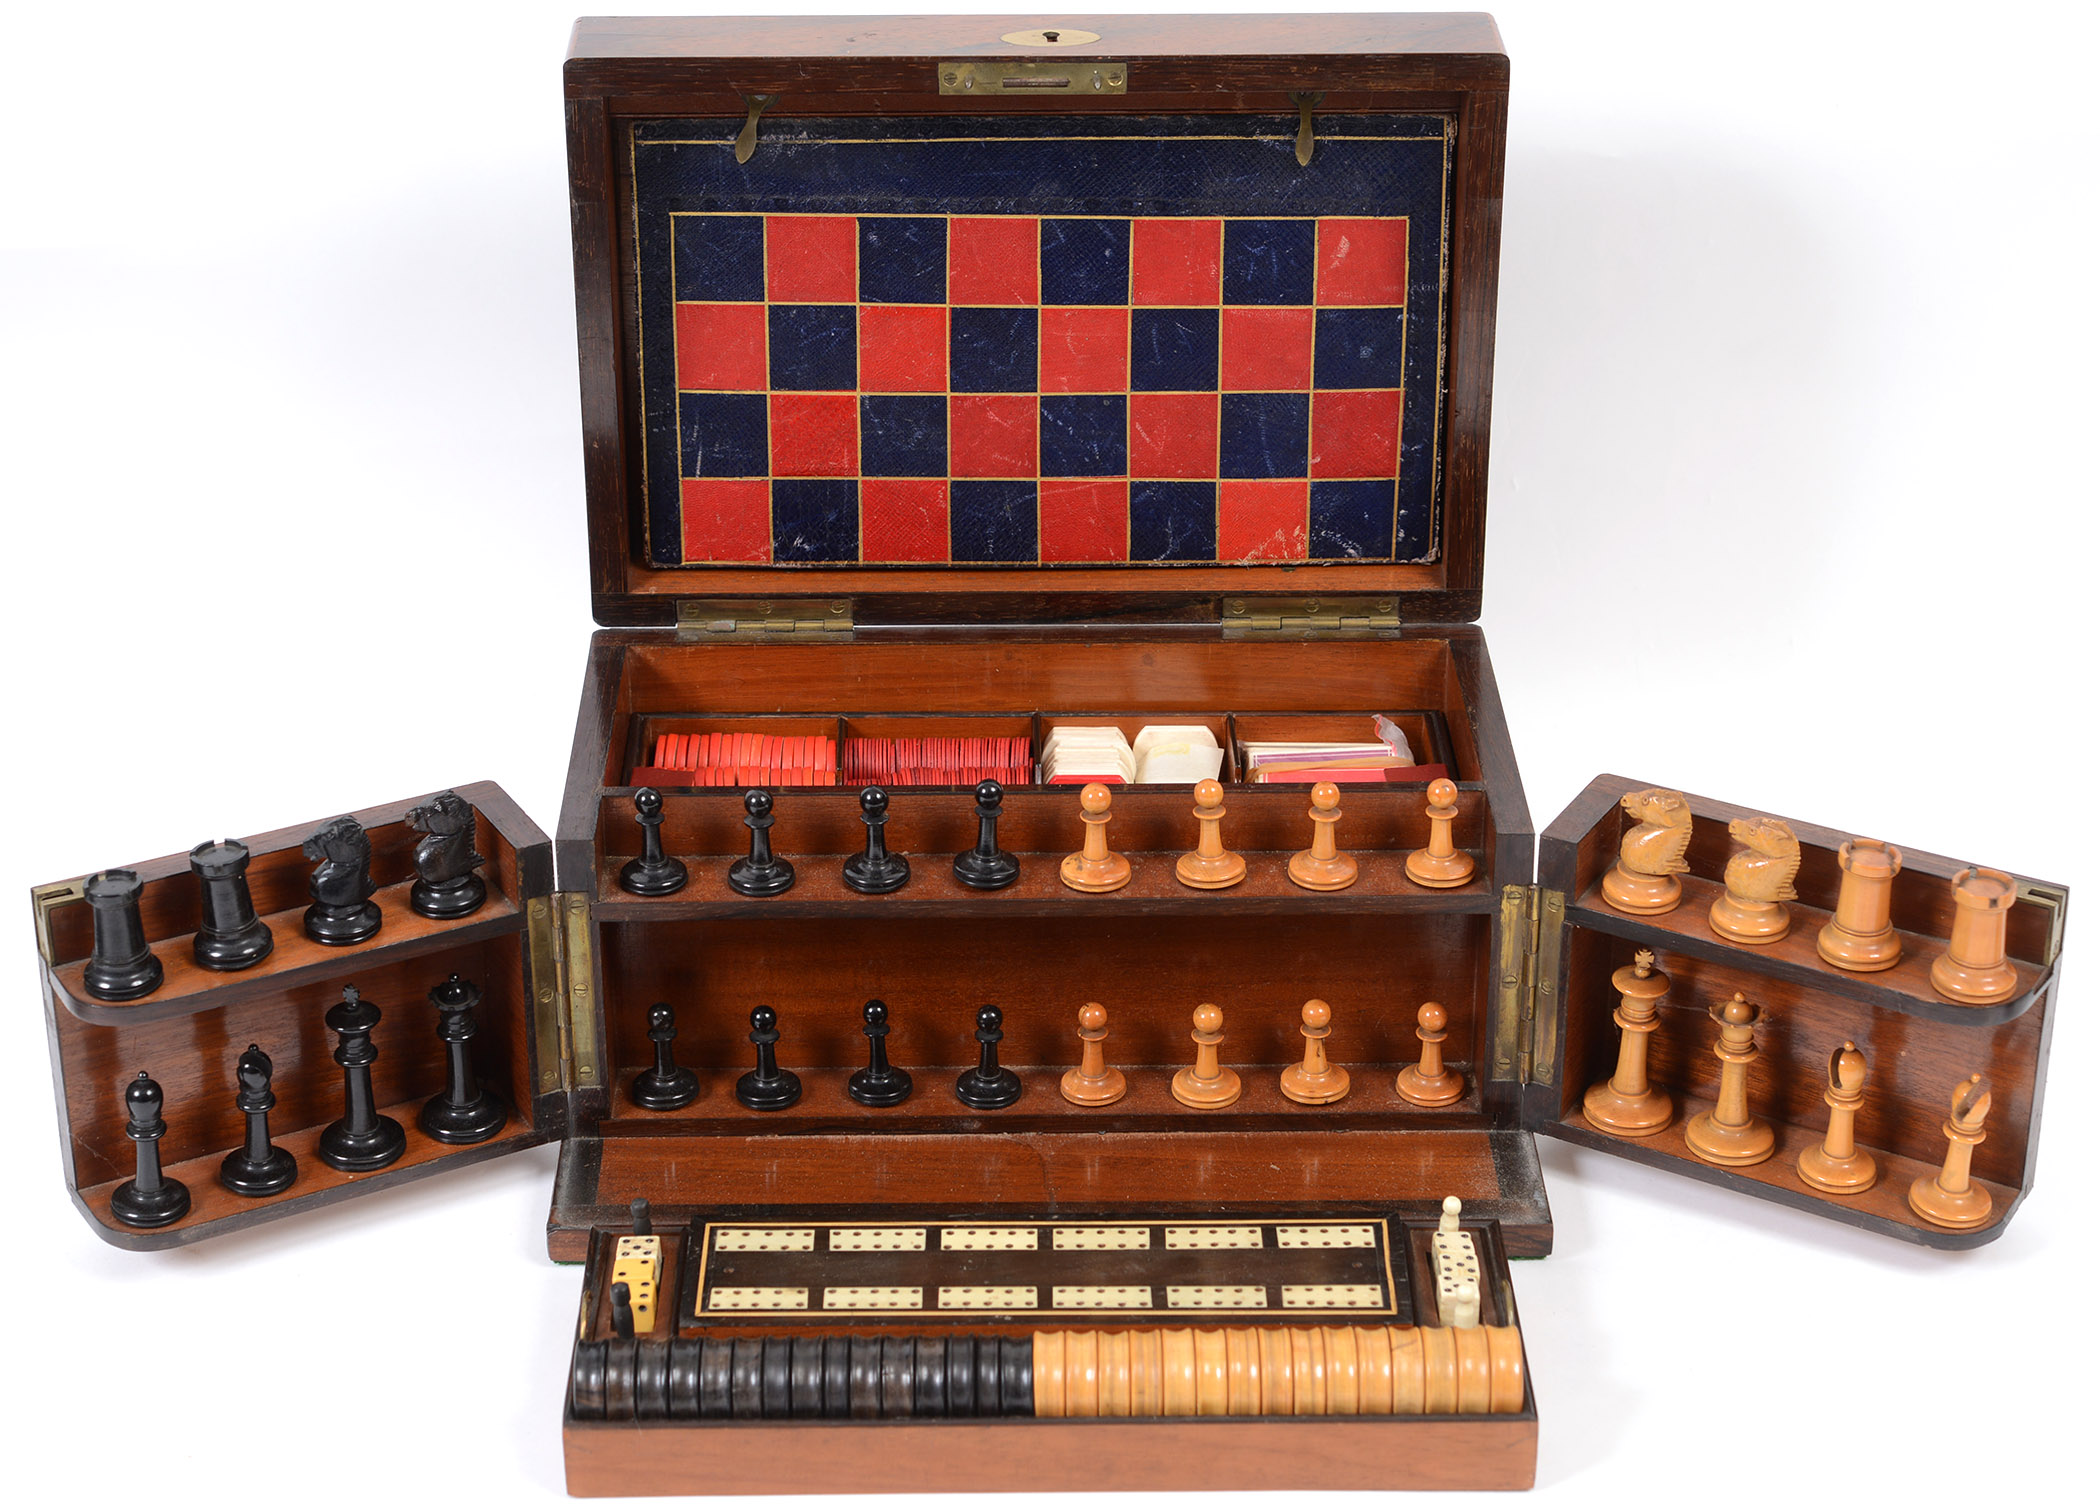 ANTIQUE GAMES COMPENDIUM a Rosewood cased Games Compendium, including a boxwood and ebony Chess Set,